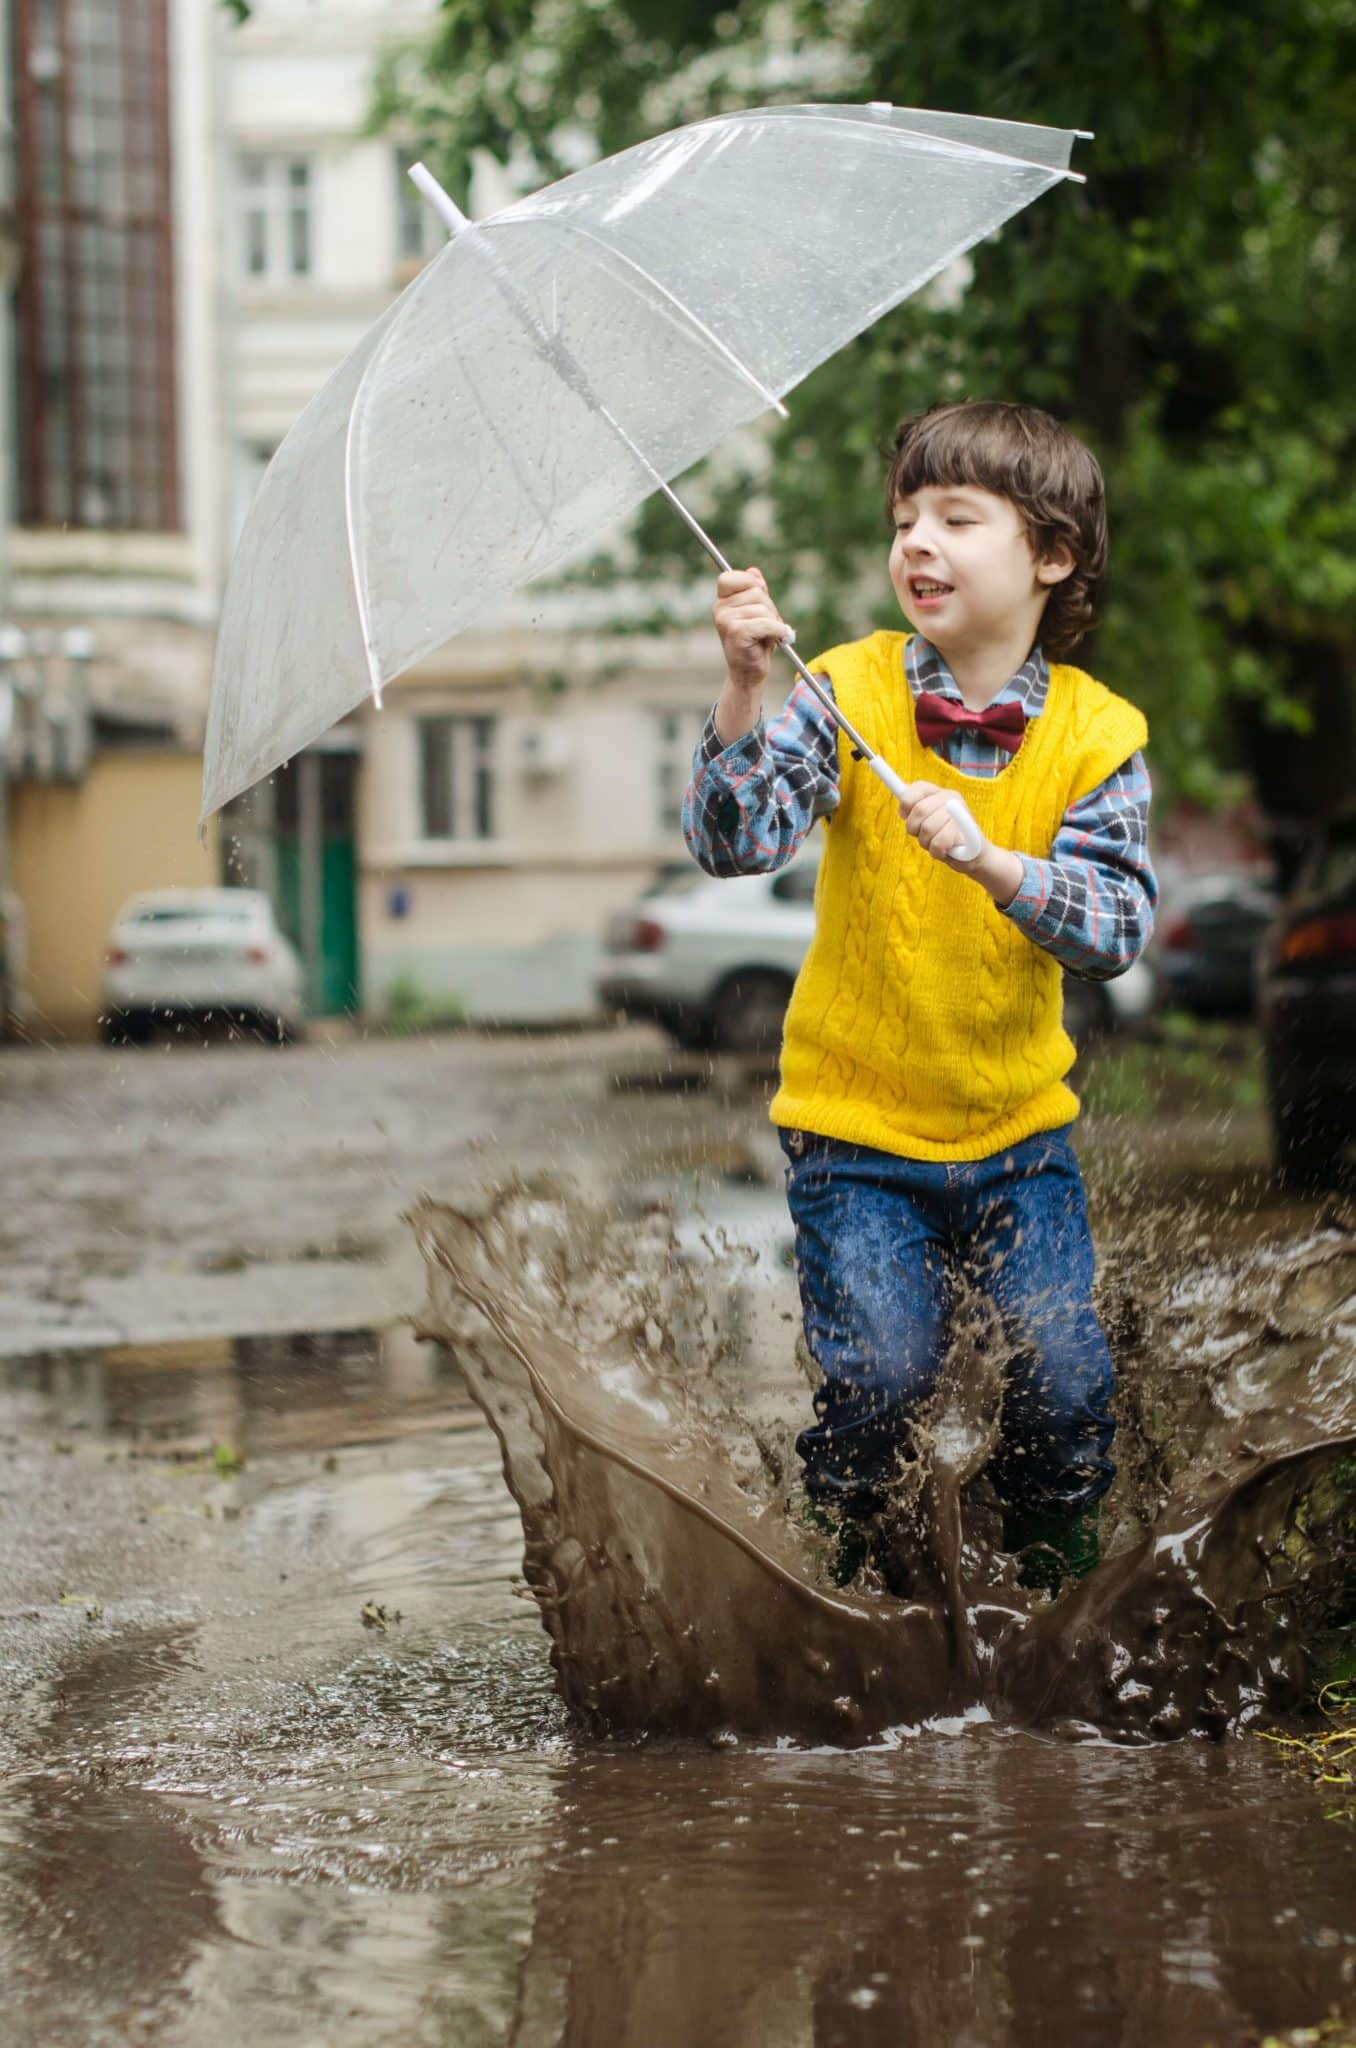 A young boy holding an umbrella and playing around in the rain in between his studies